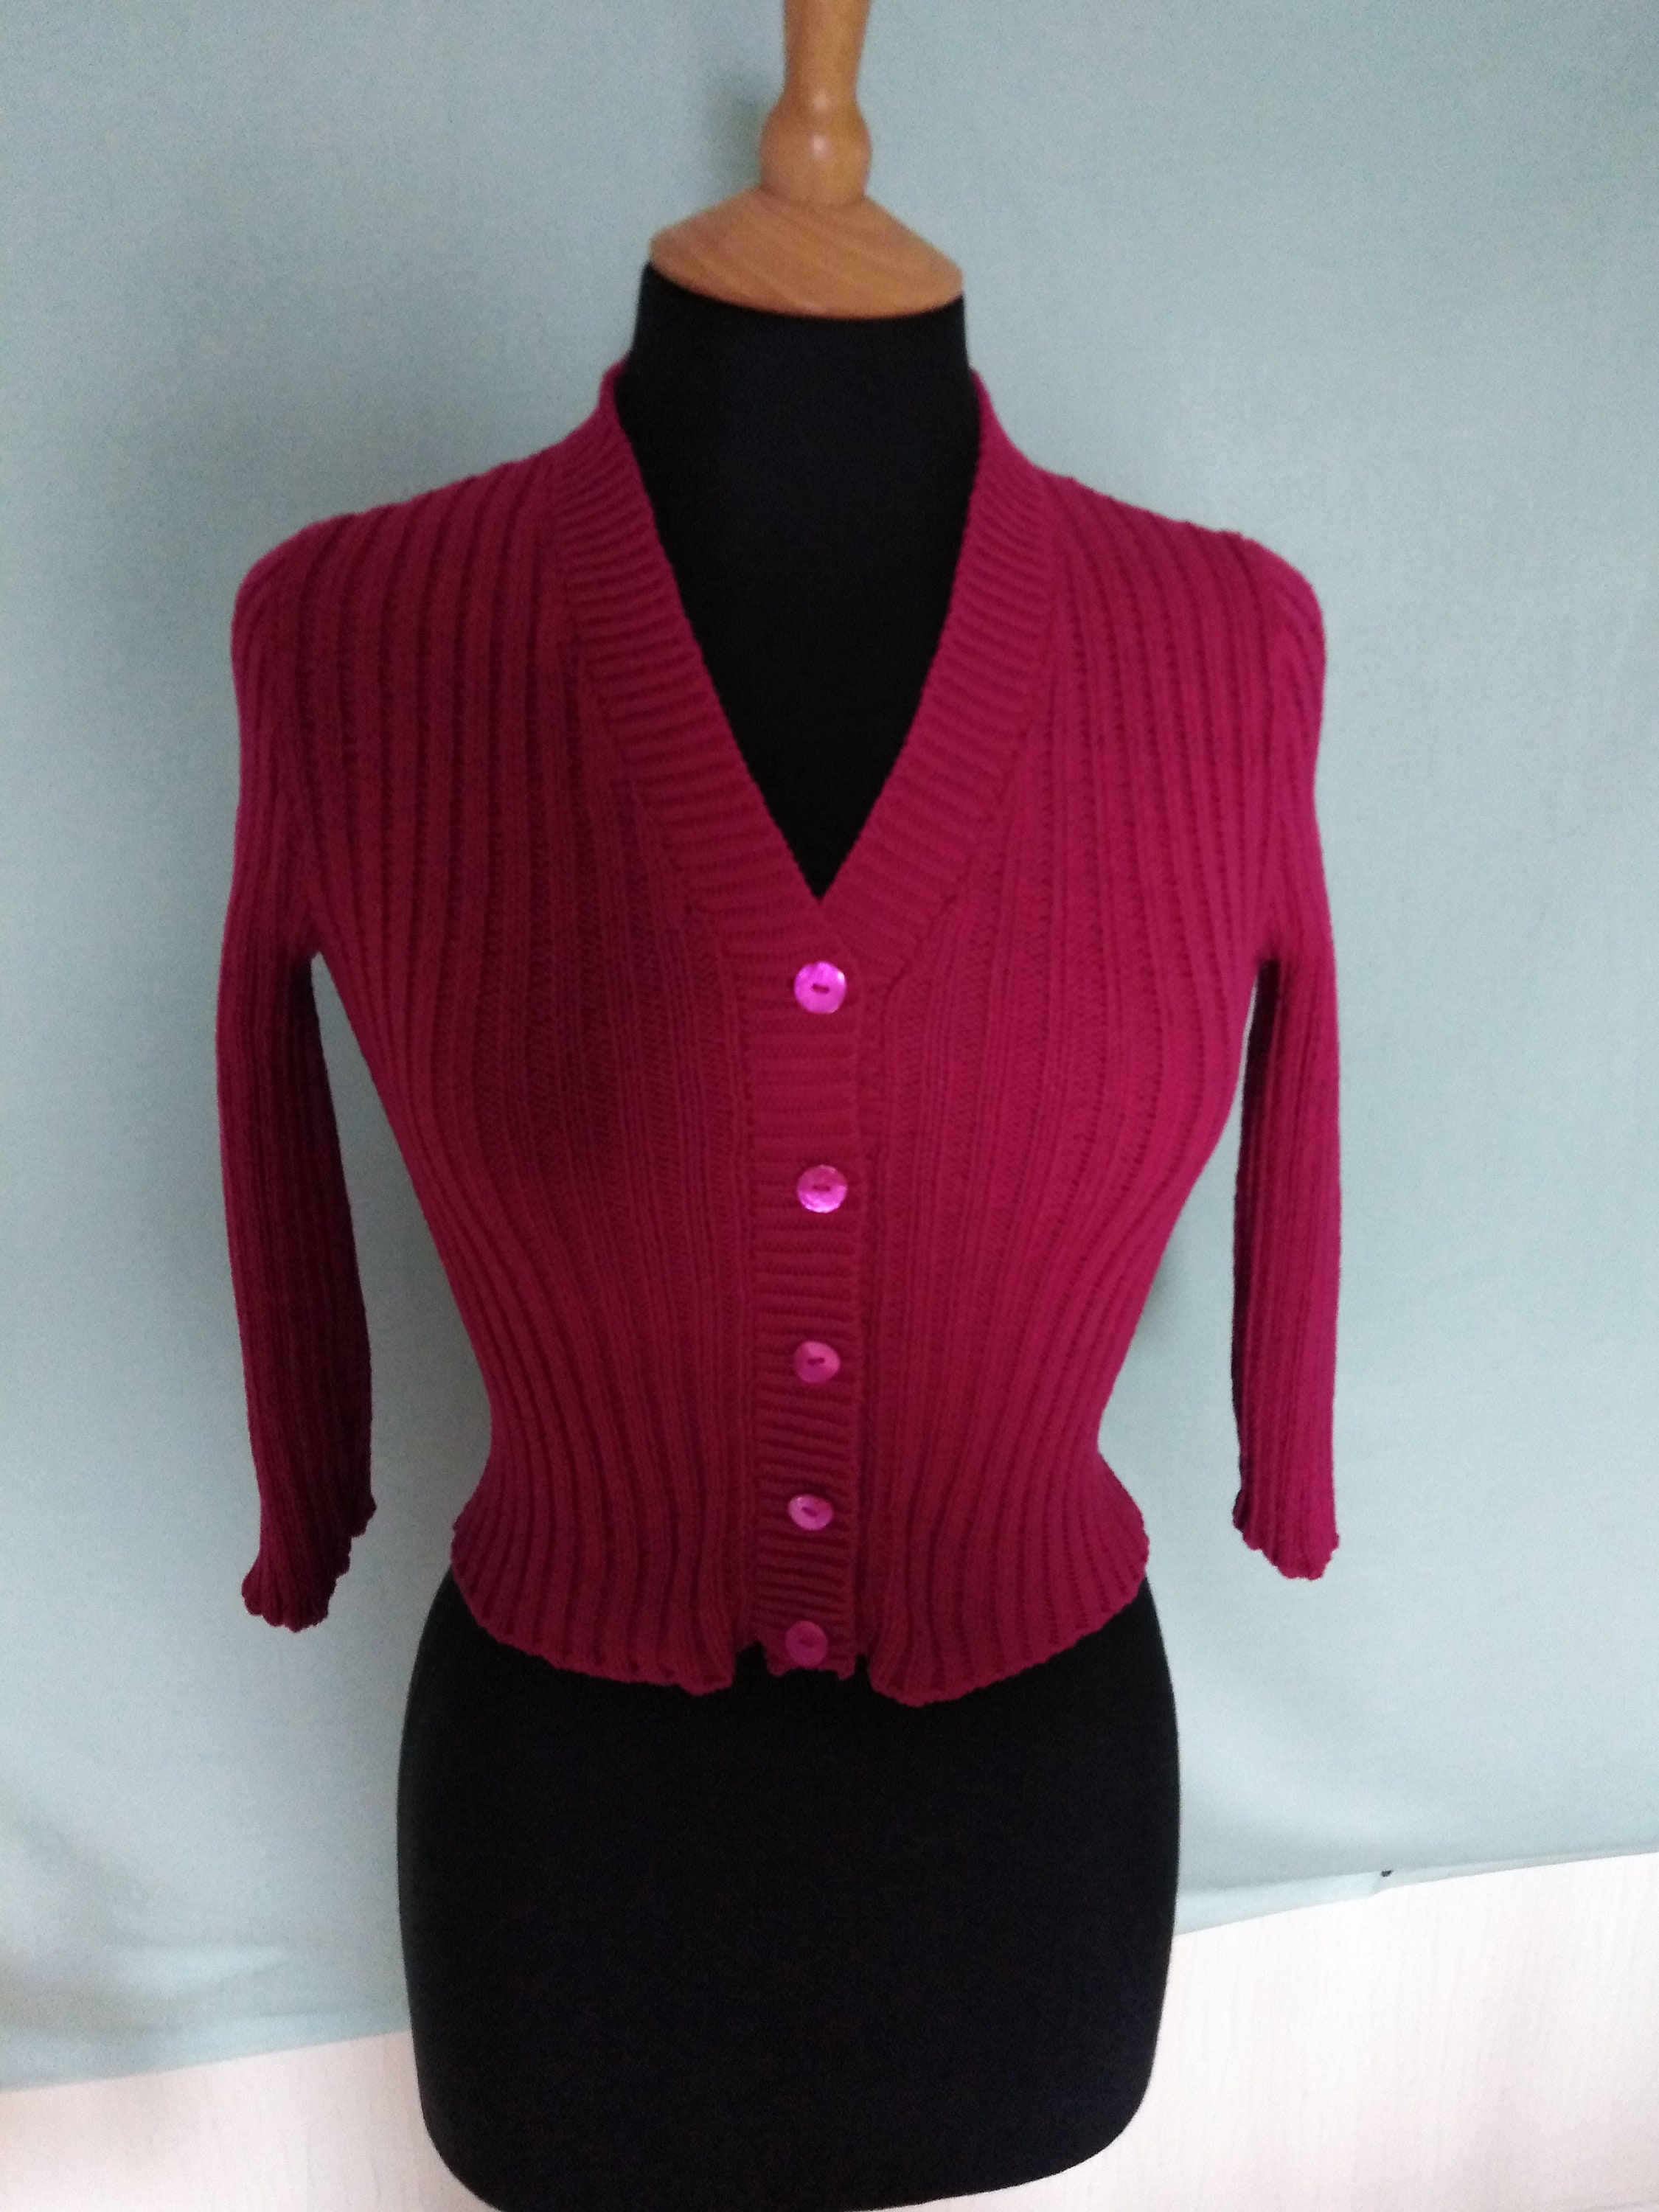 Handmade Reproduction 1940s Knitted Cardigan With 3/4 Sleeves - Etsy